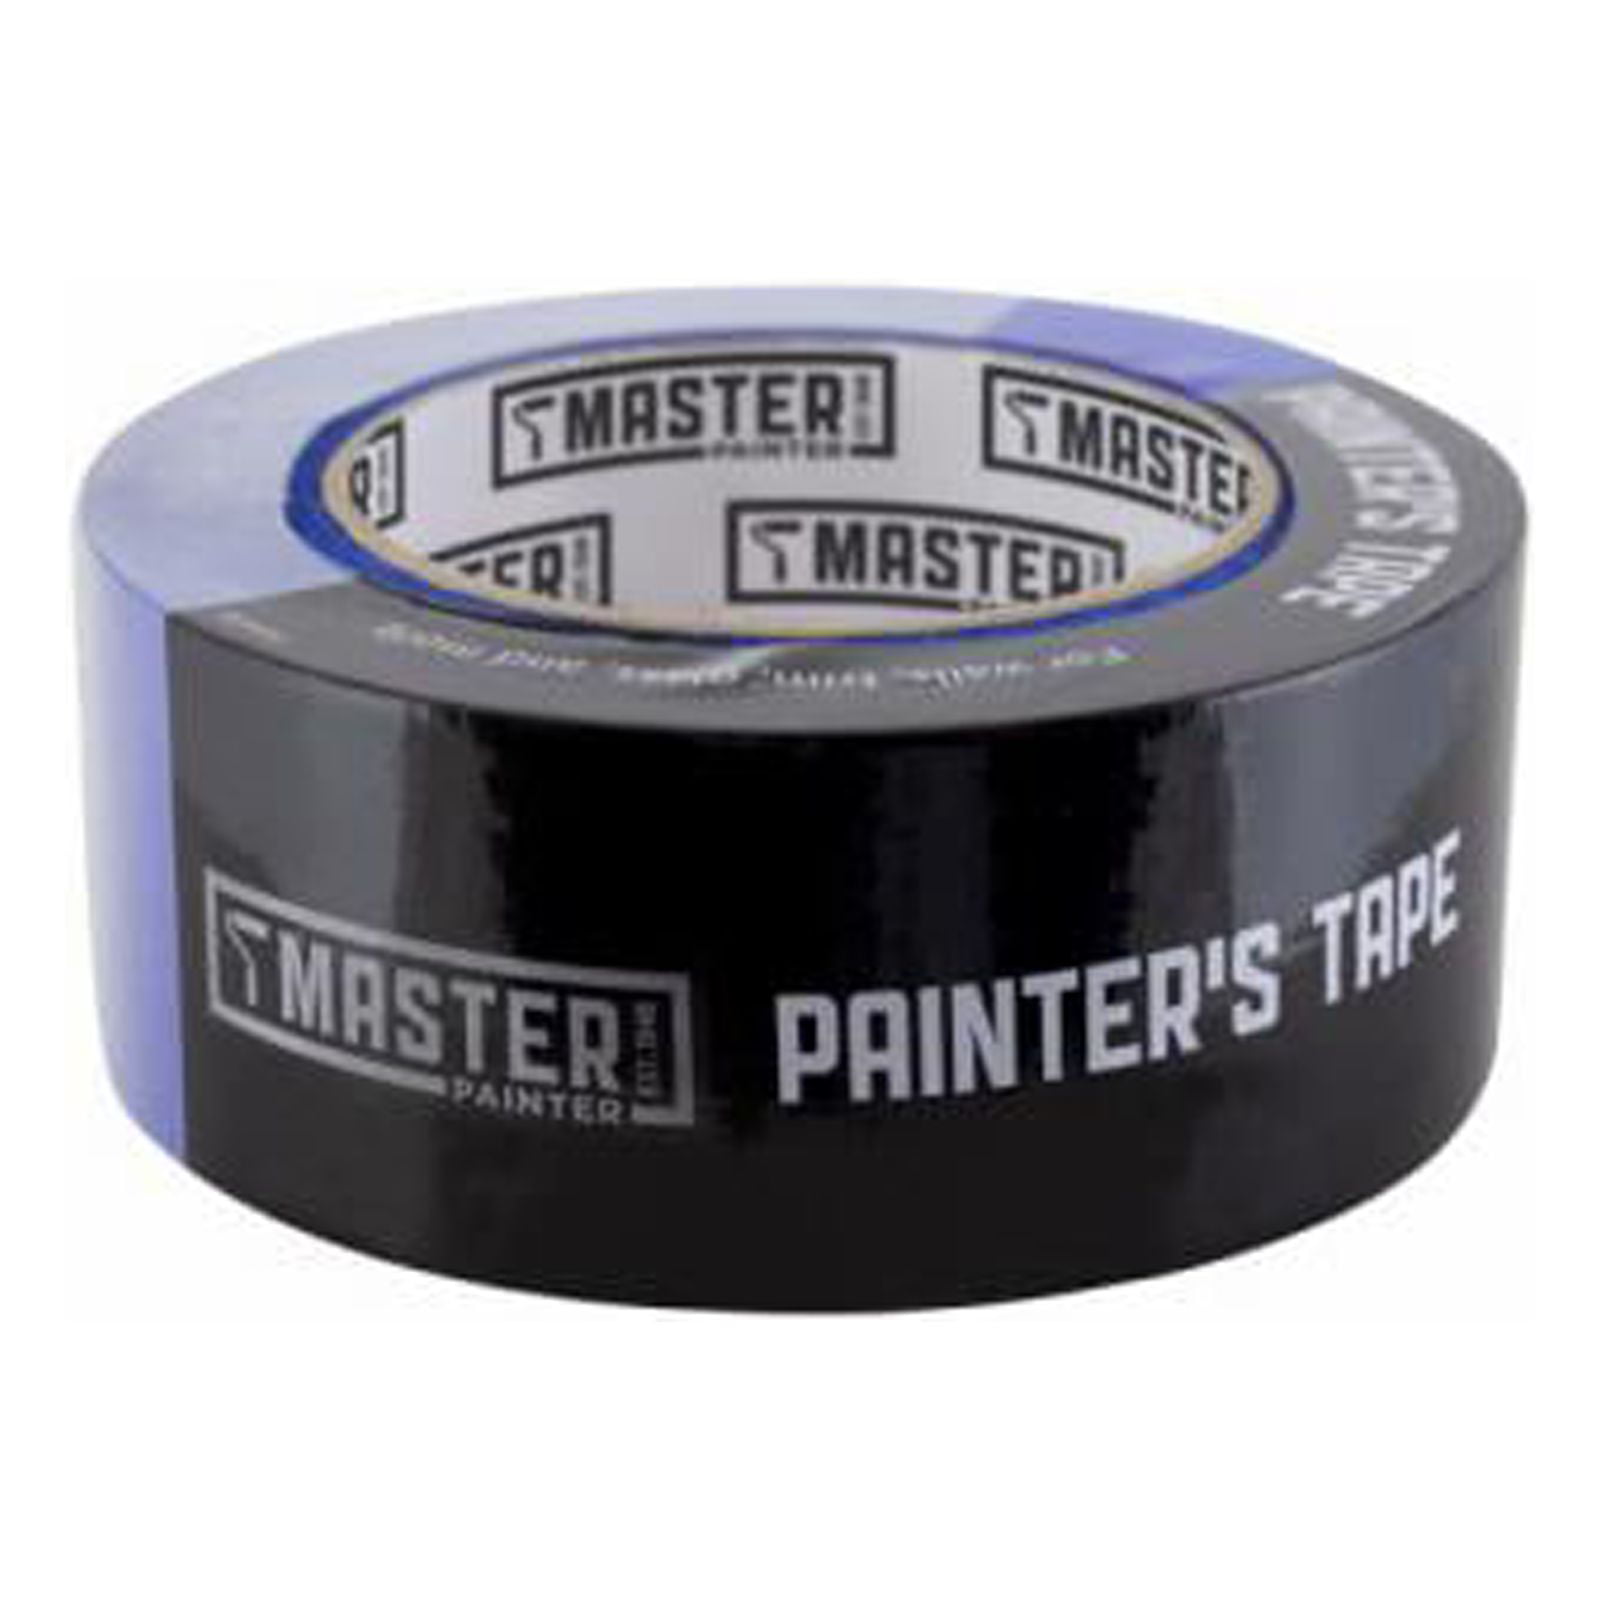 2-PK PAINTER'S MATE Multi-Surface Painter's Tape Green 1.88 IN x